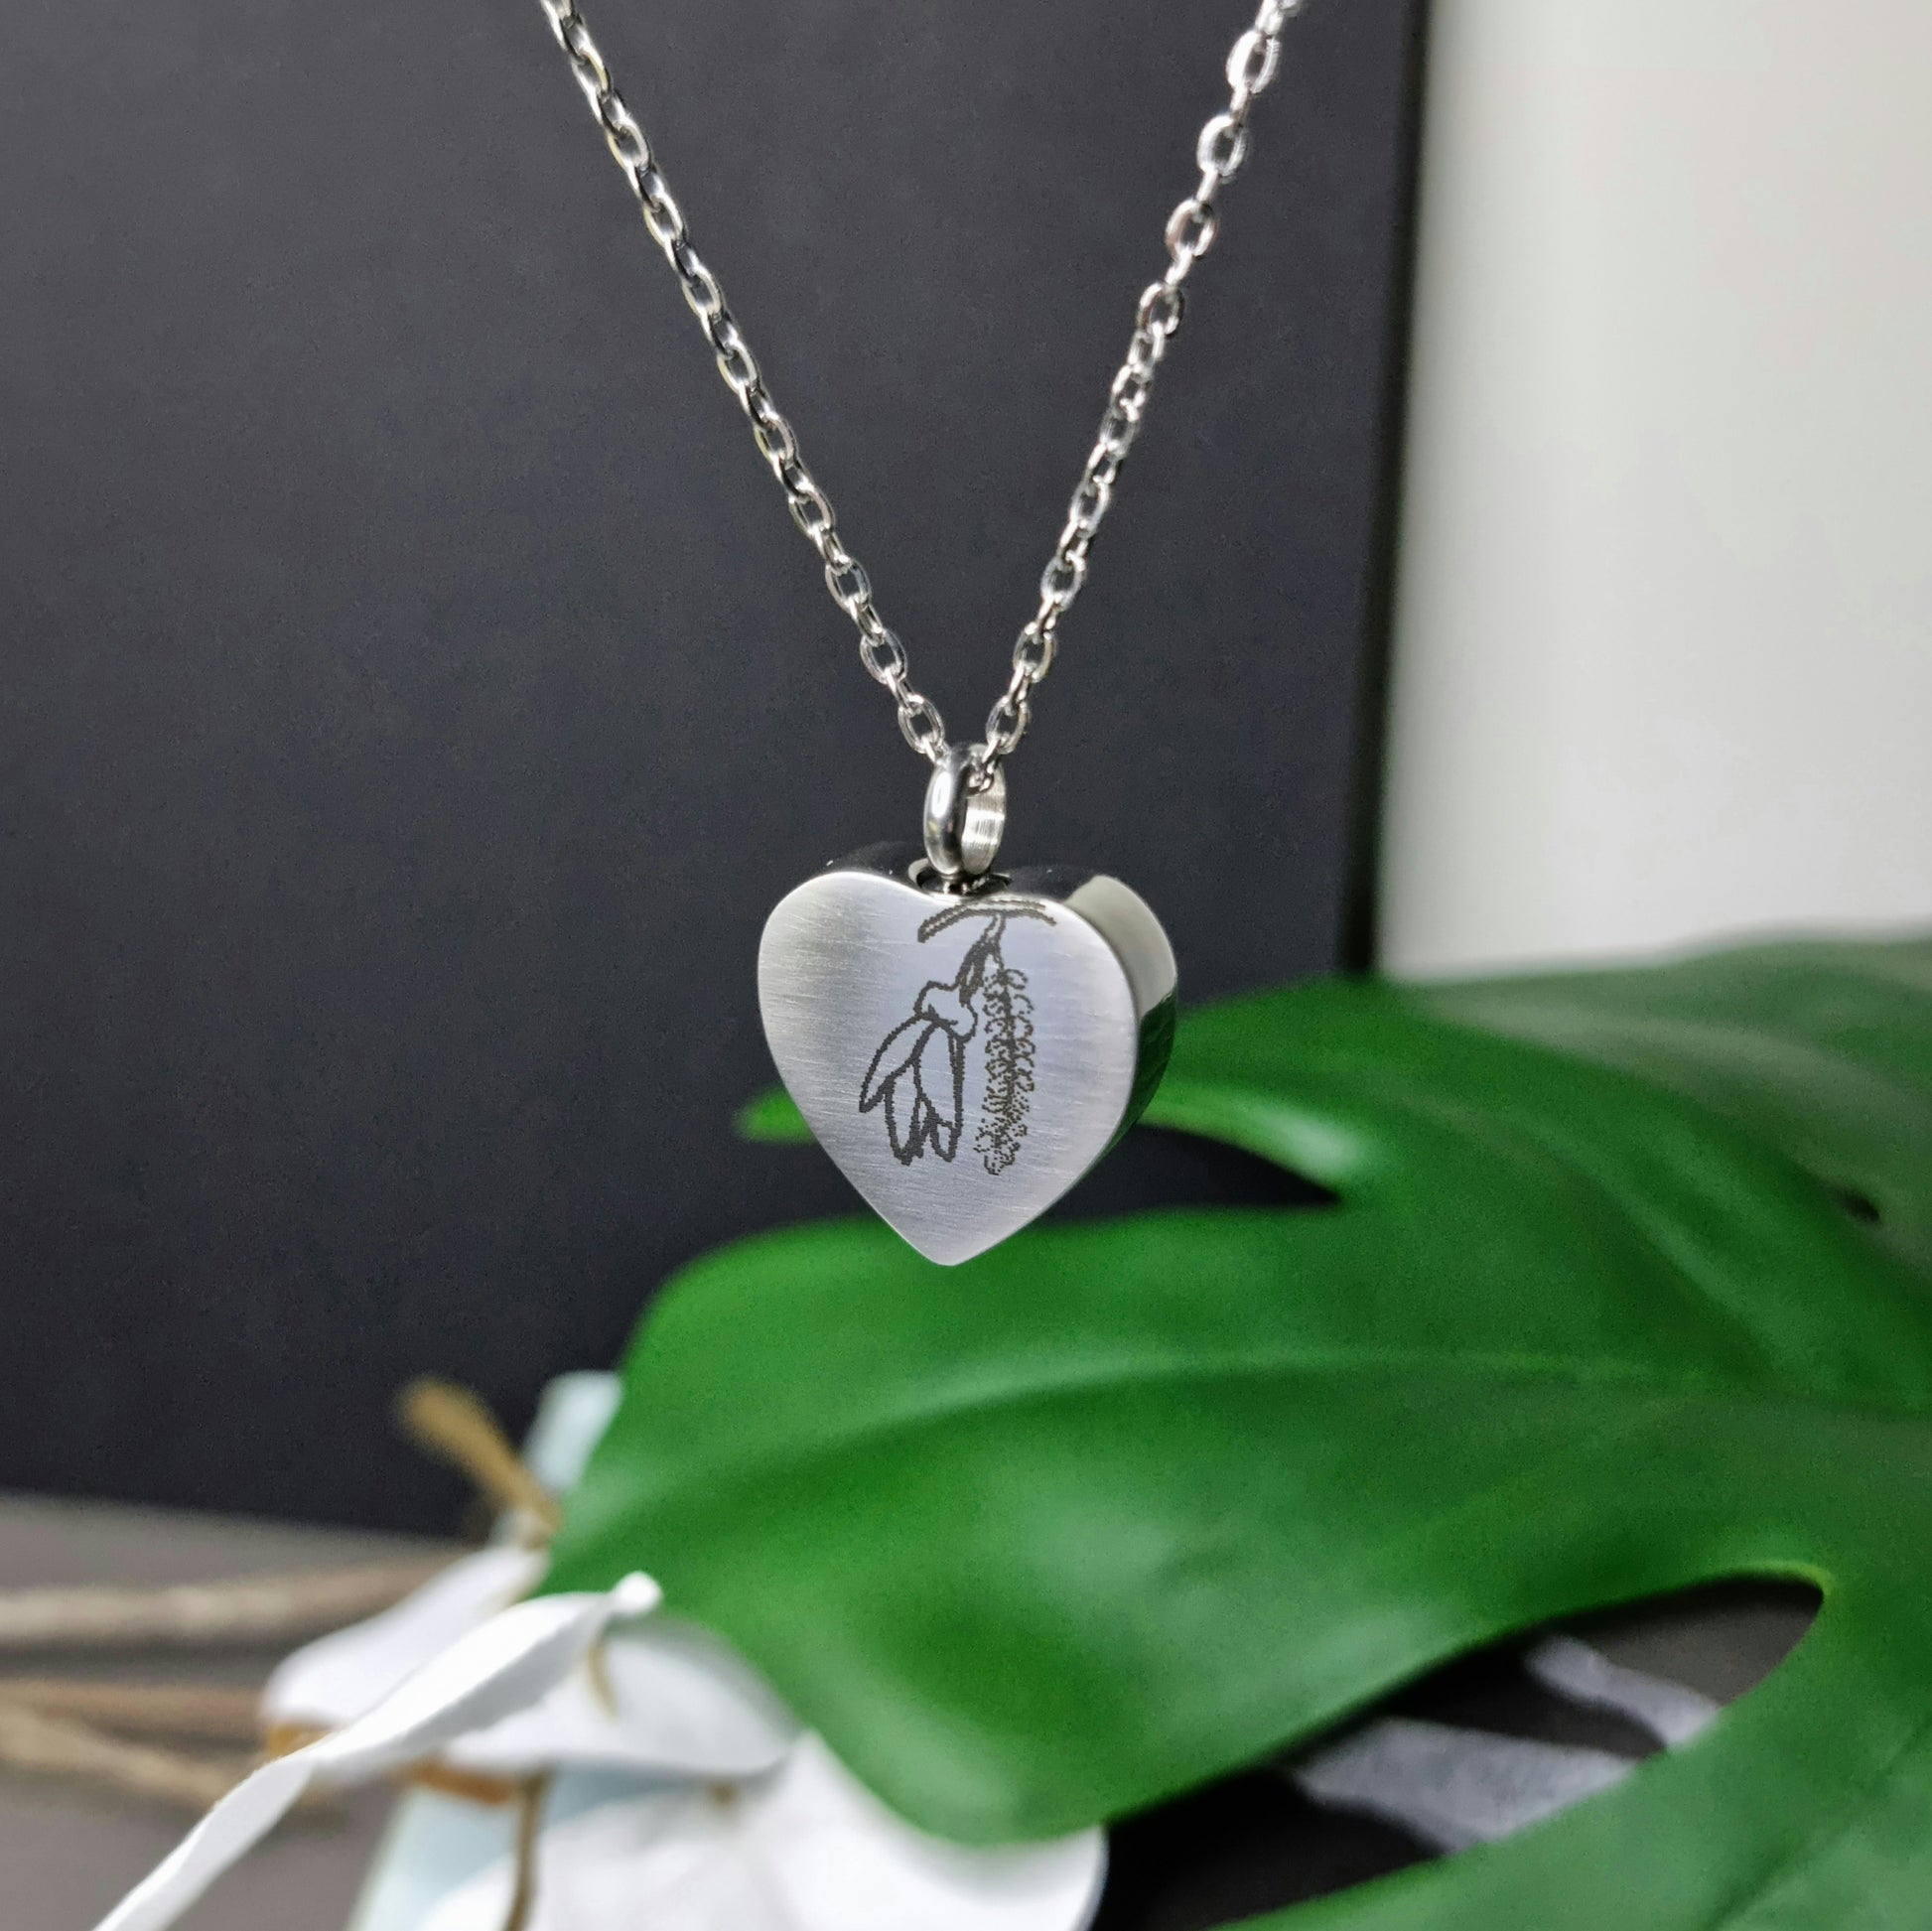 Kowhai Engraved Keepsake Memorial Necklace Urn for cremation ashes or pet hair